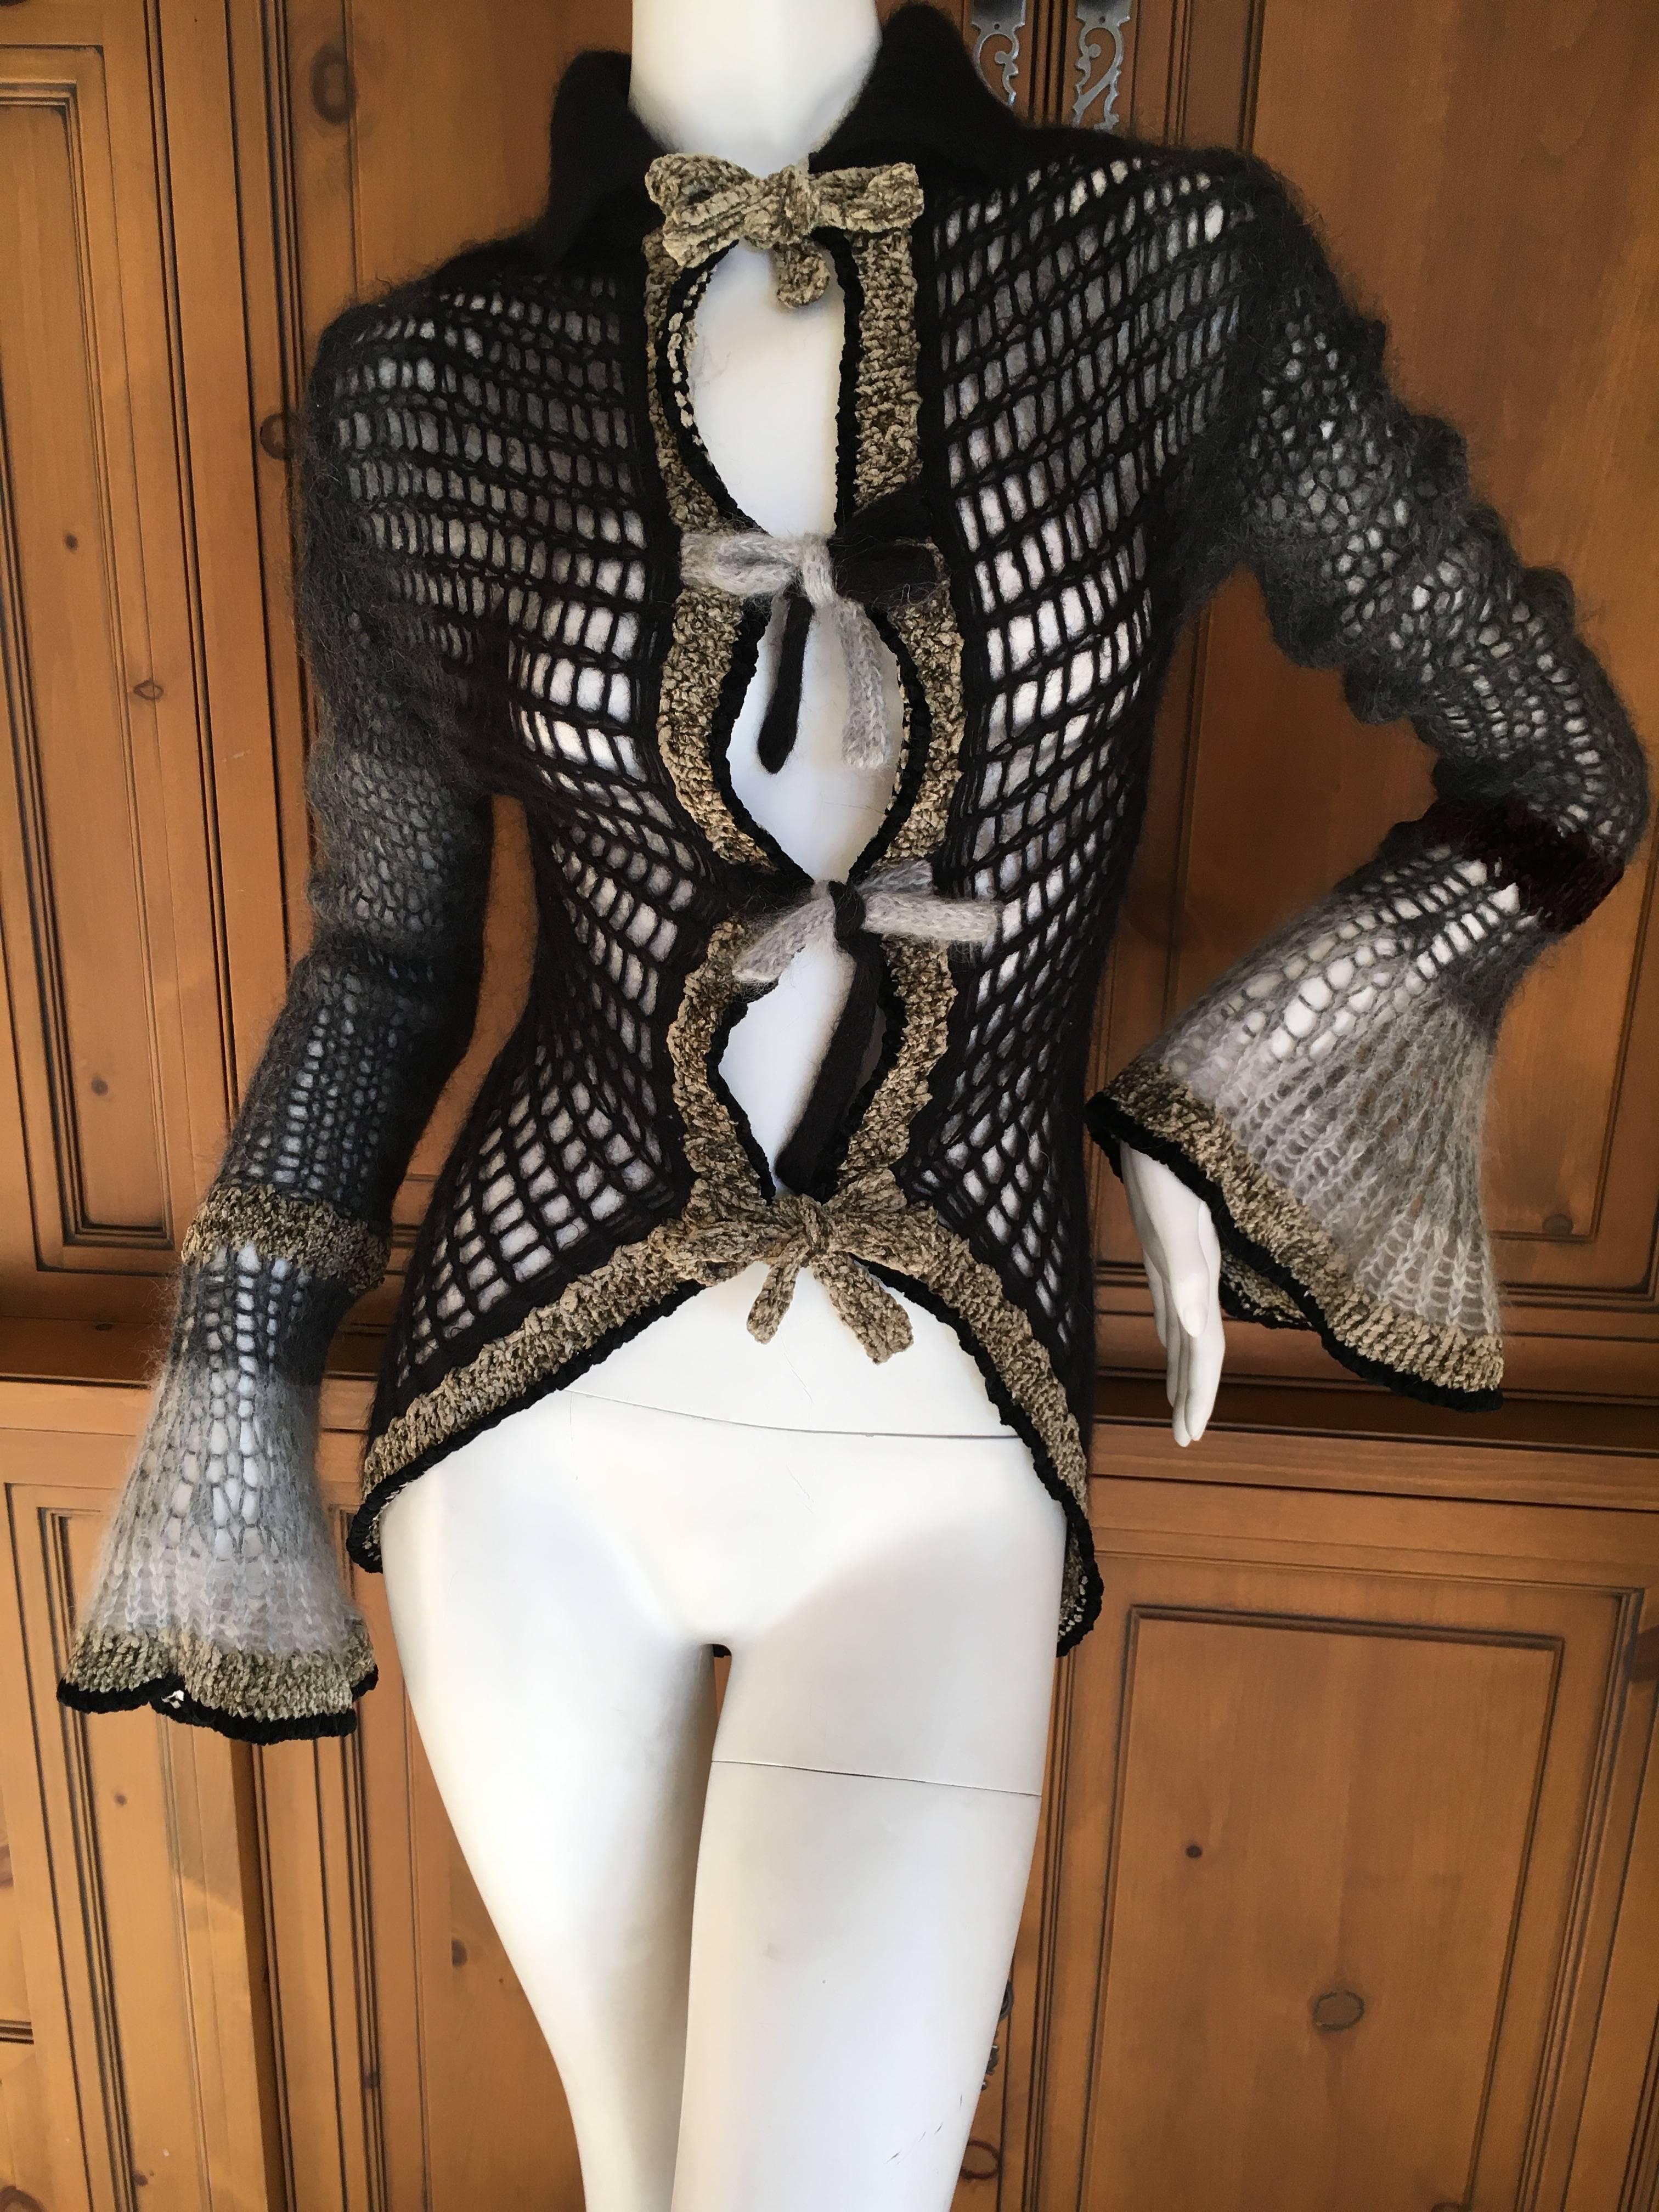 Jean Paul Gaultier Maille Femme Ombre Crochet Bell Sleeve Sweater.
Gray to black gradation, this is such a pretty sweater.
Very loose crochet knit sweater with tie front. 
New with tags
Size Small
Bust 36